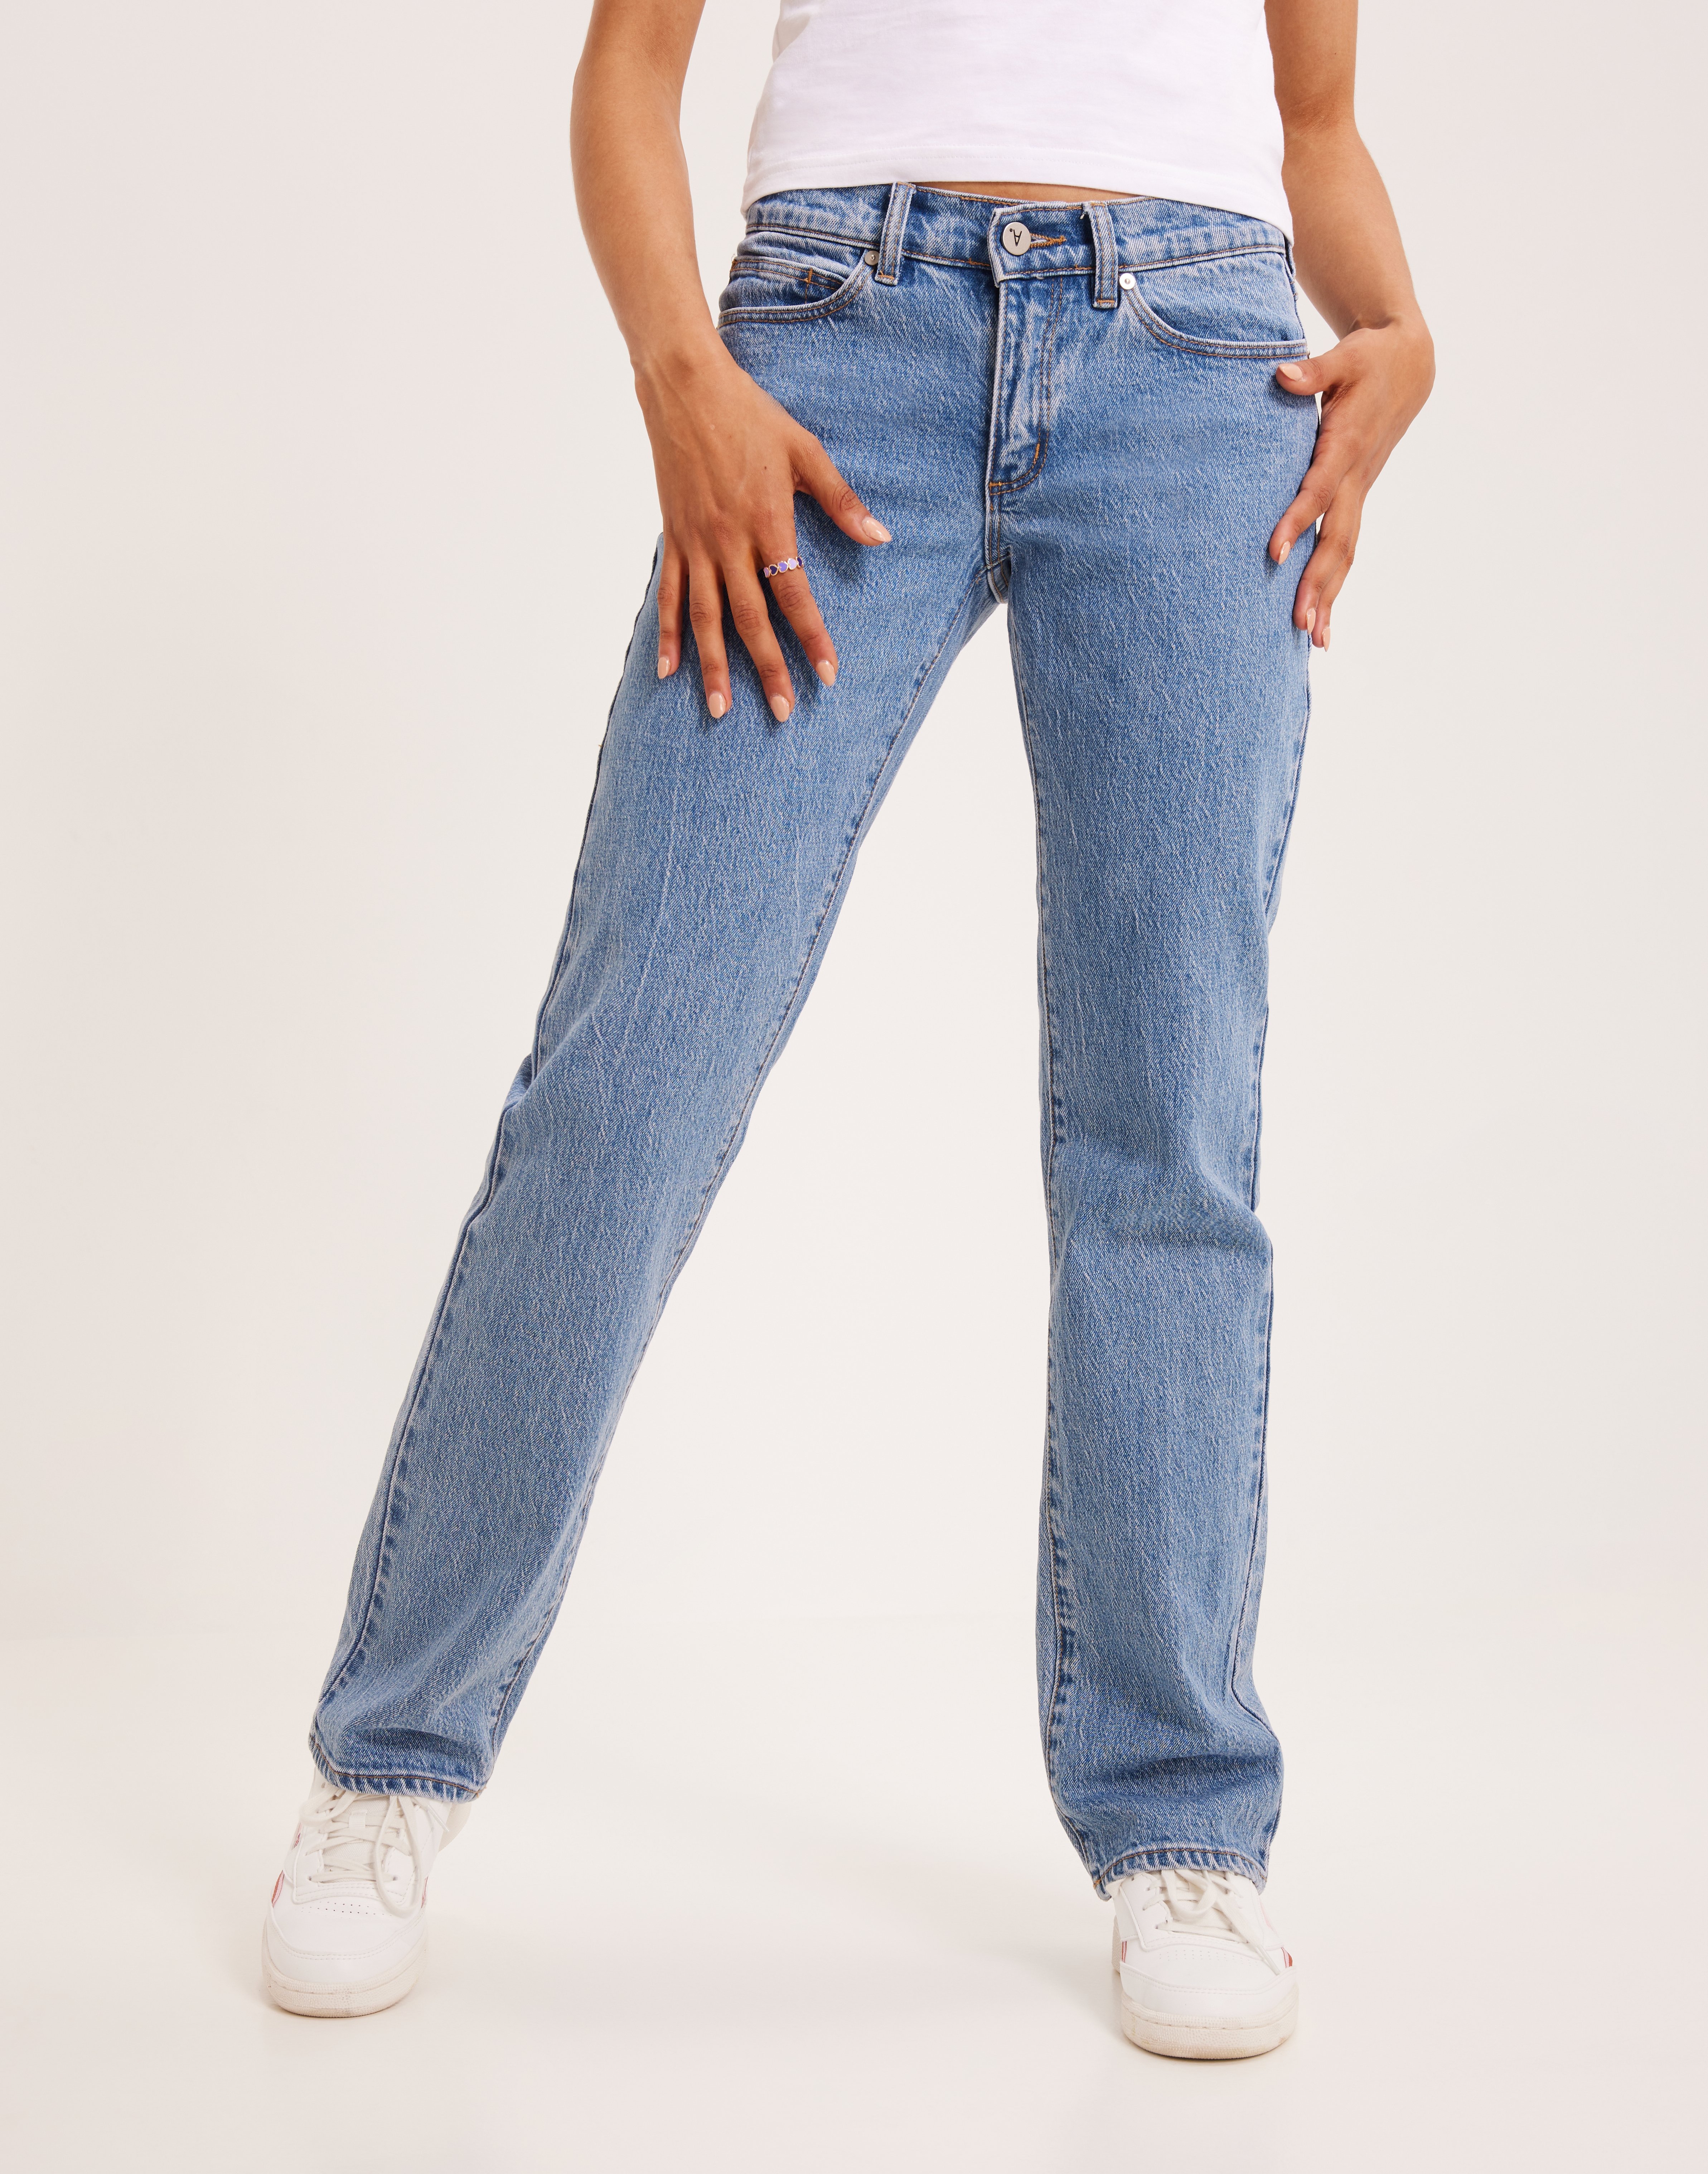 Abrand Jeans - Straight - A 99 Low Straight Debbie - Jeans - Straight